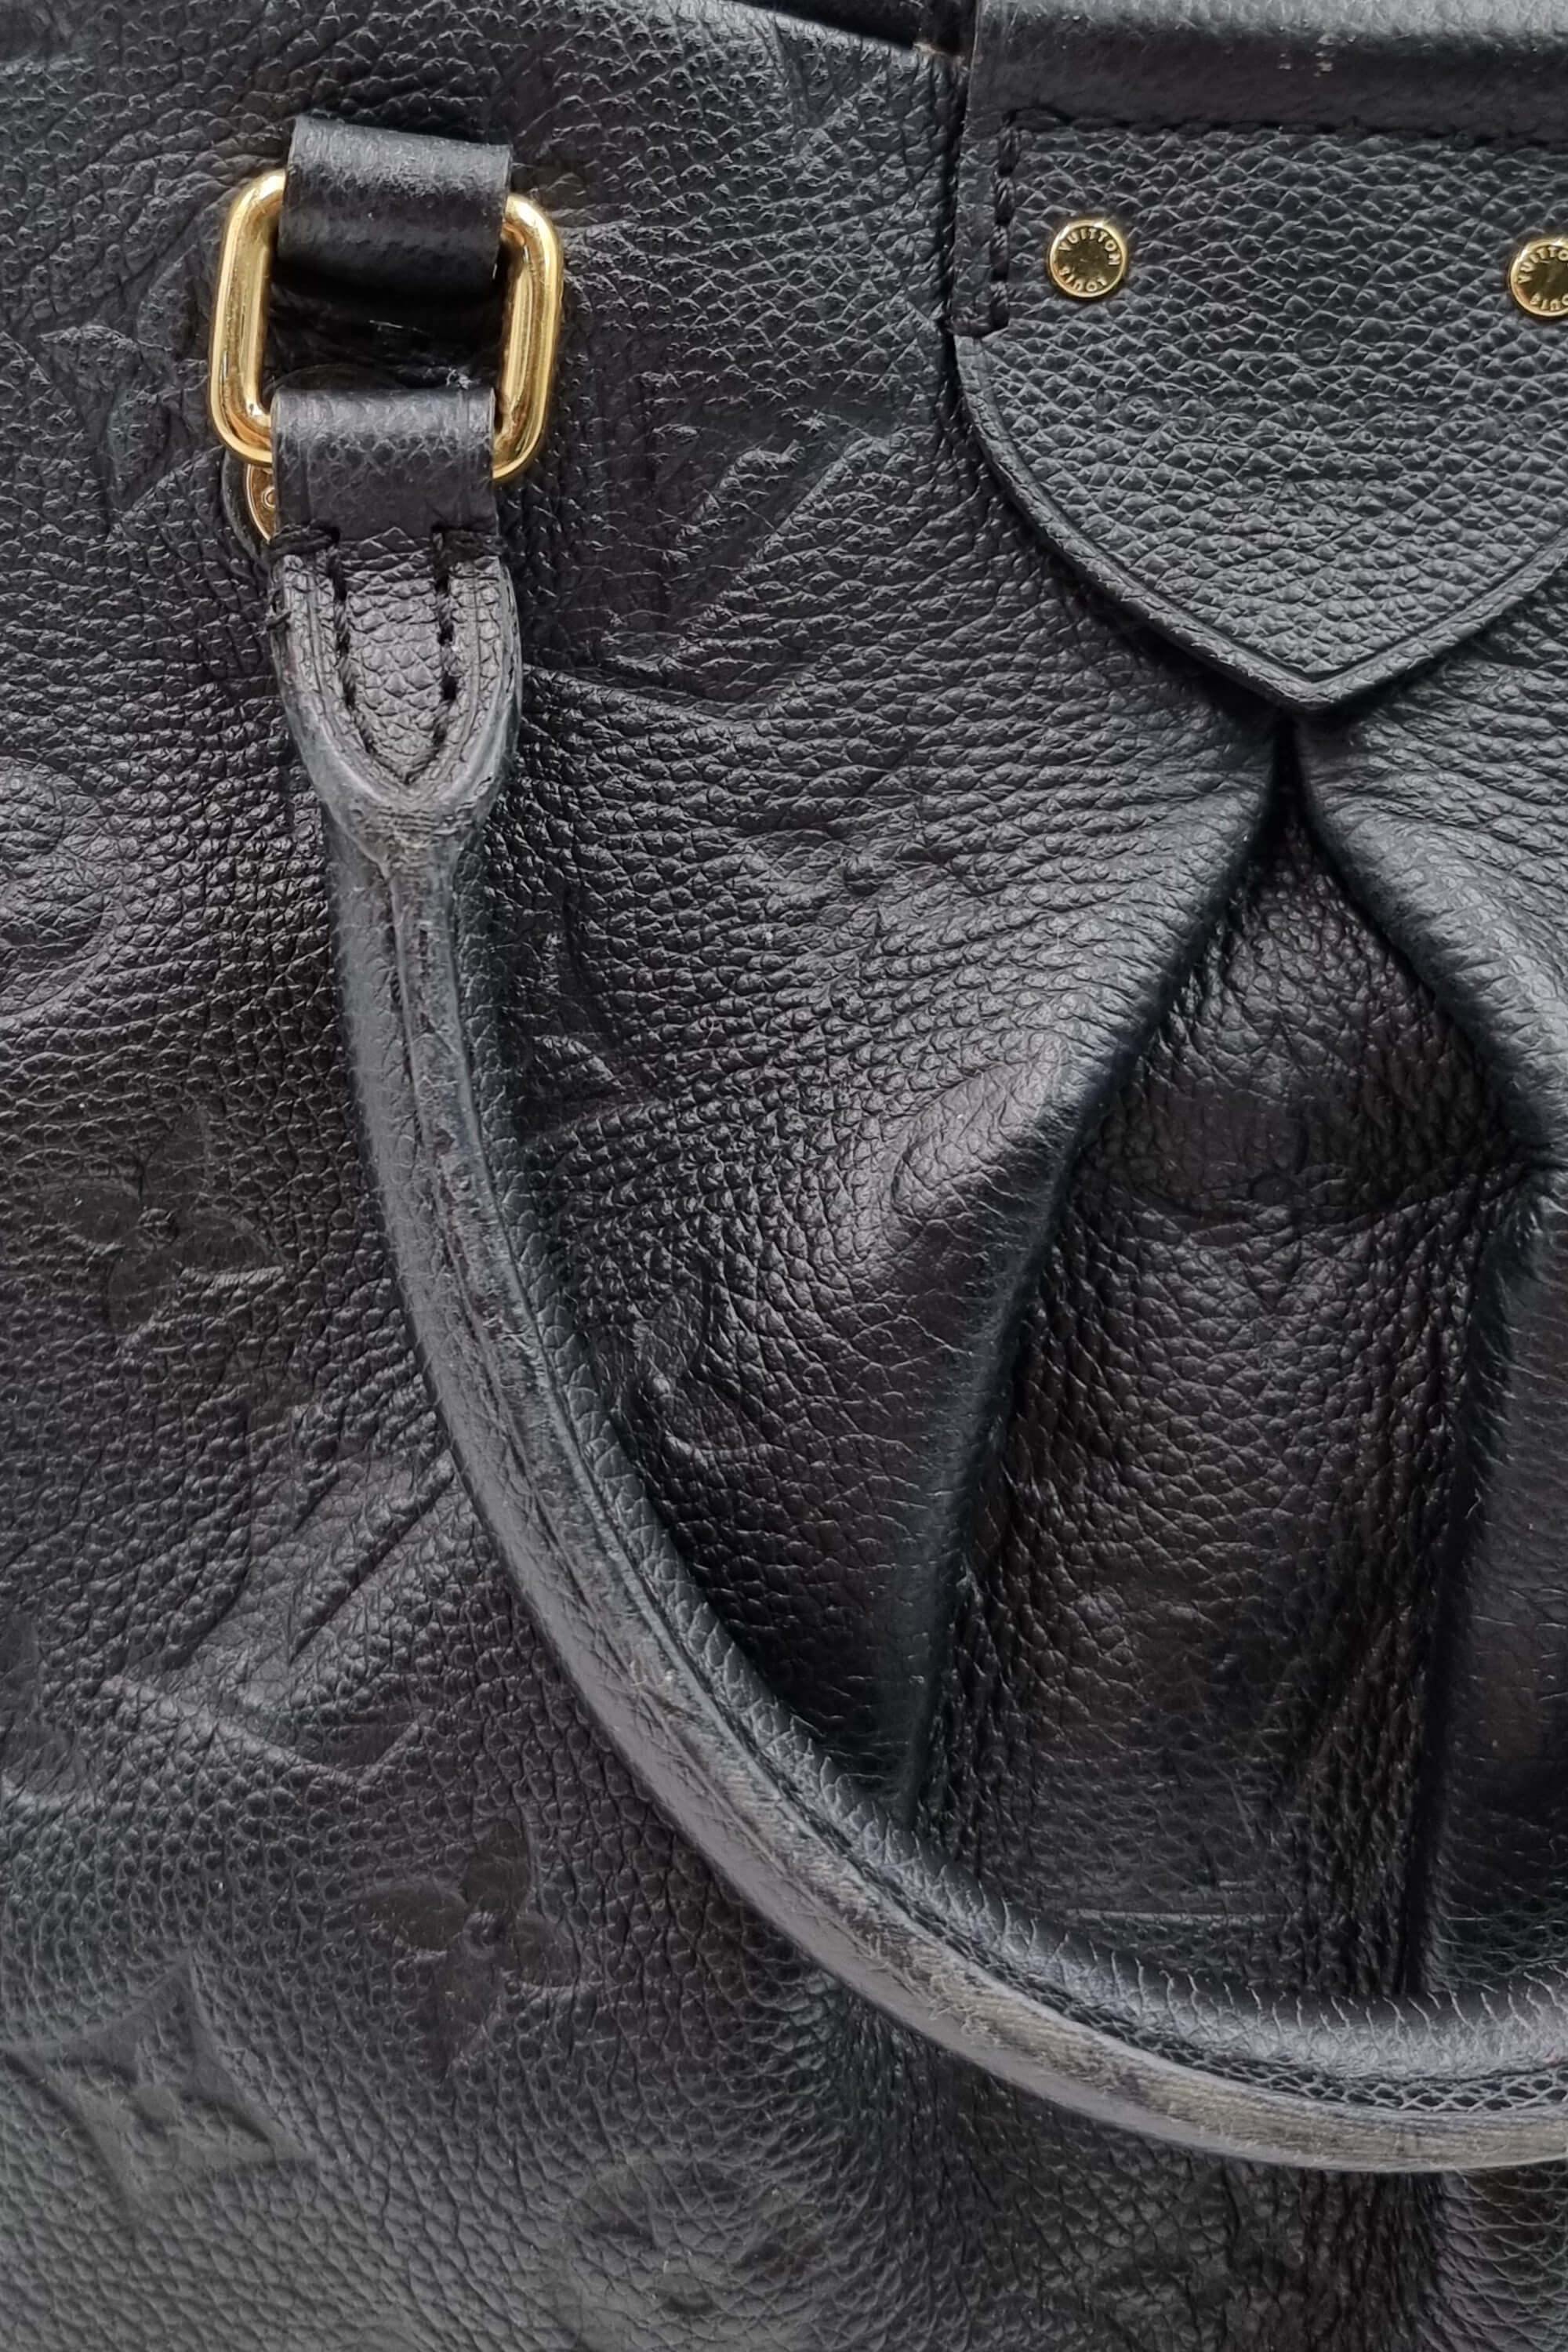 Louis Vuitton Mazarine PM bag in black & embossed leather. Similar shape to  the Siena bag. Love all three colours of the Ma…